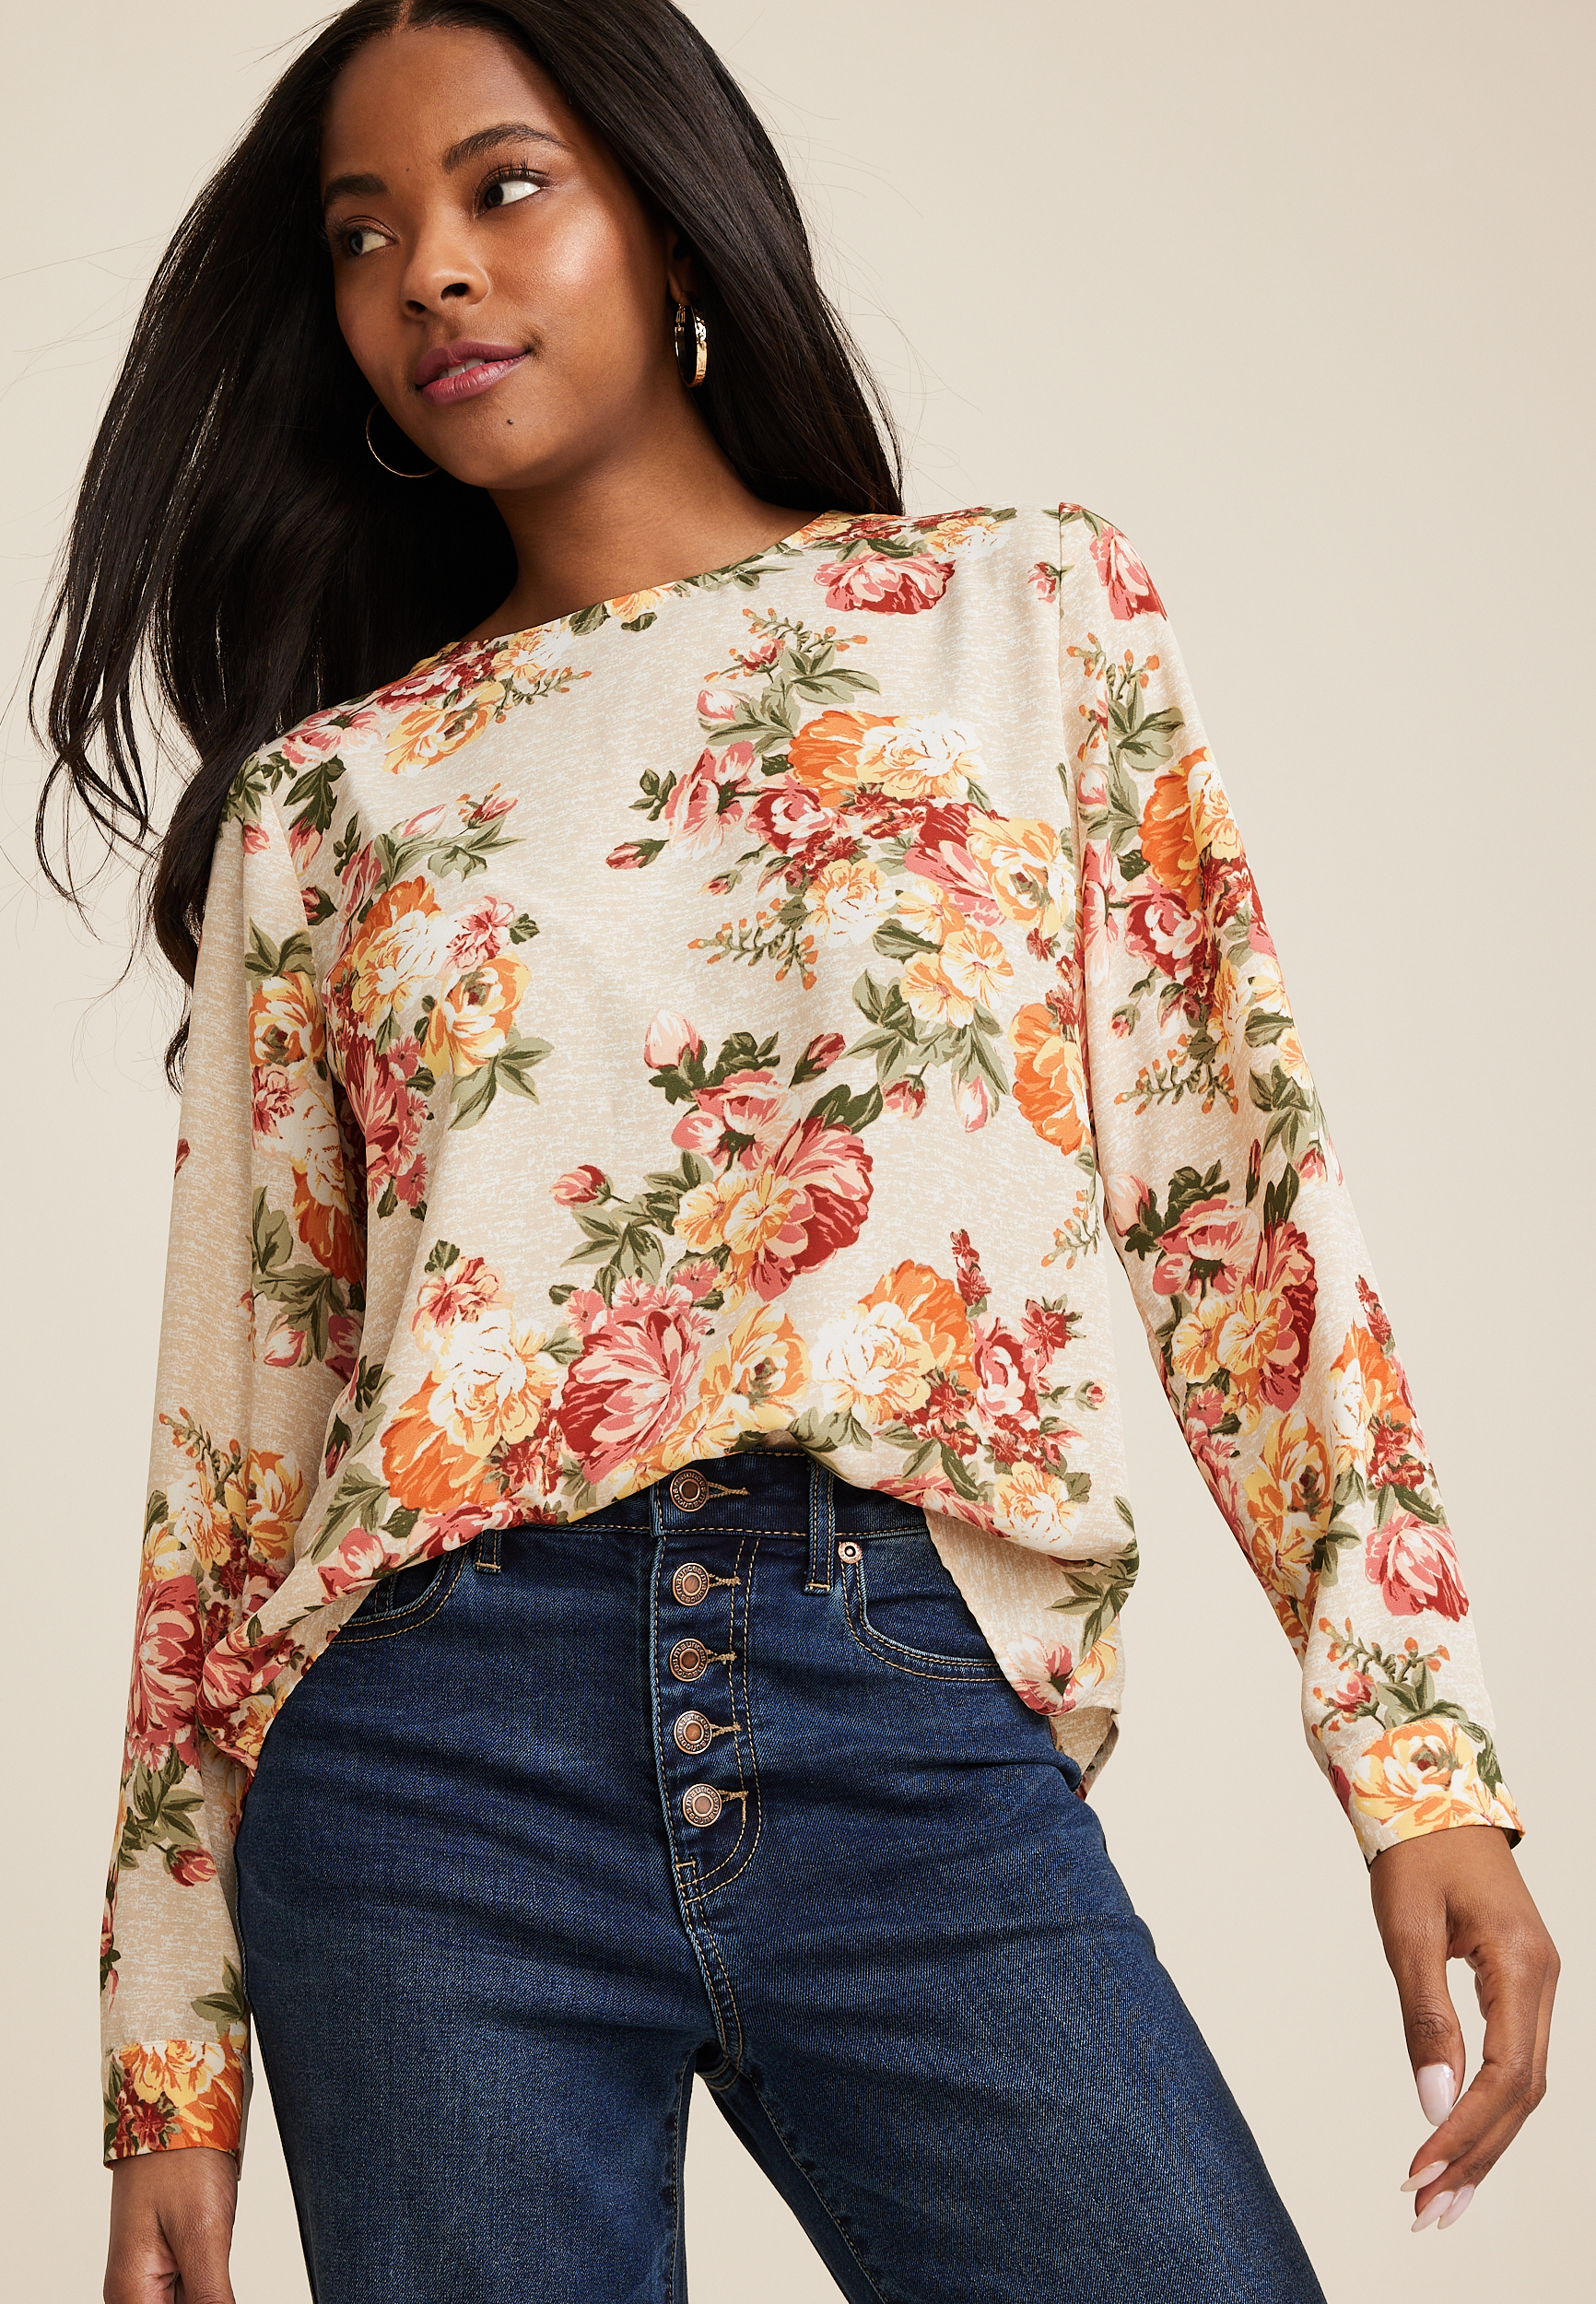 Women's Shirts & Blouses: Flowy, Floral, Peasant & More